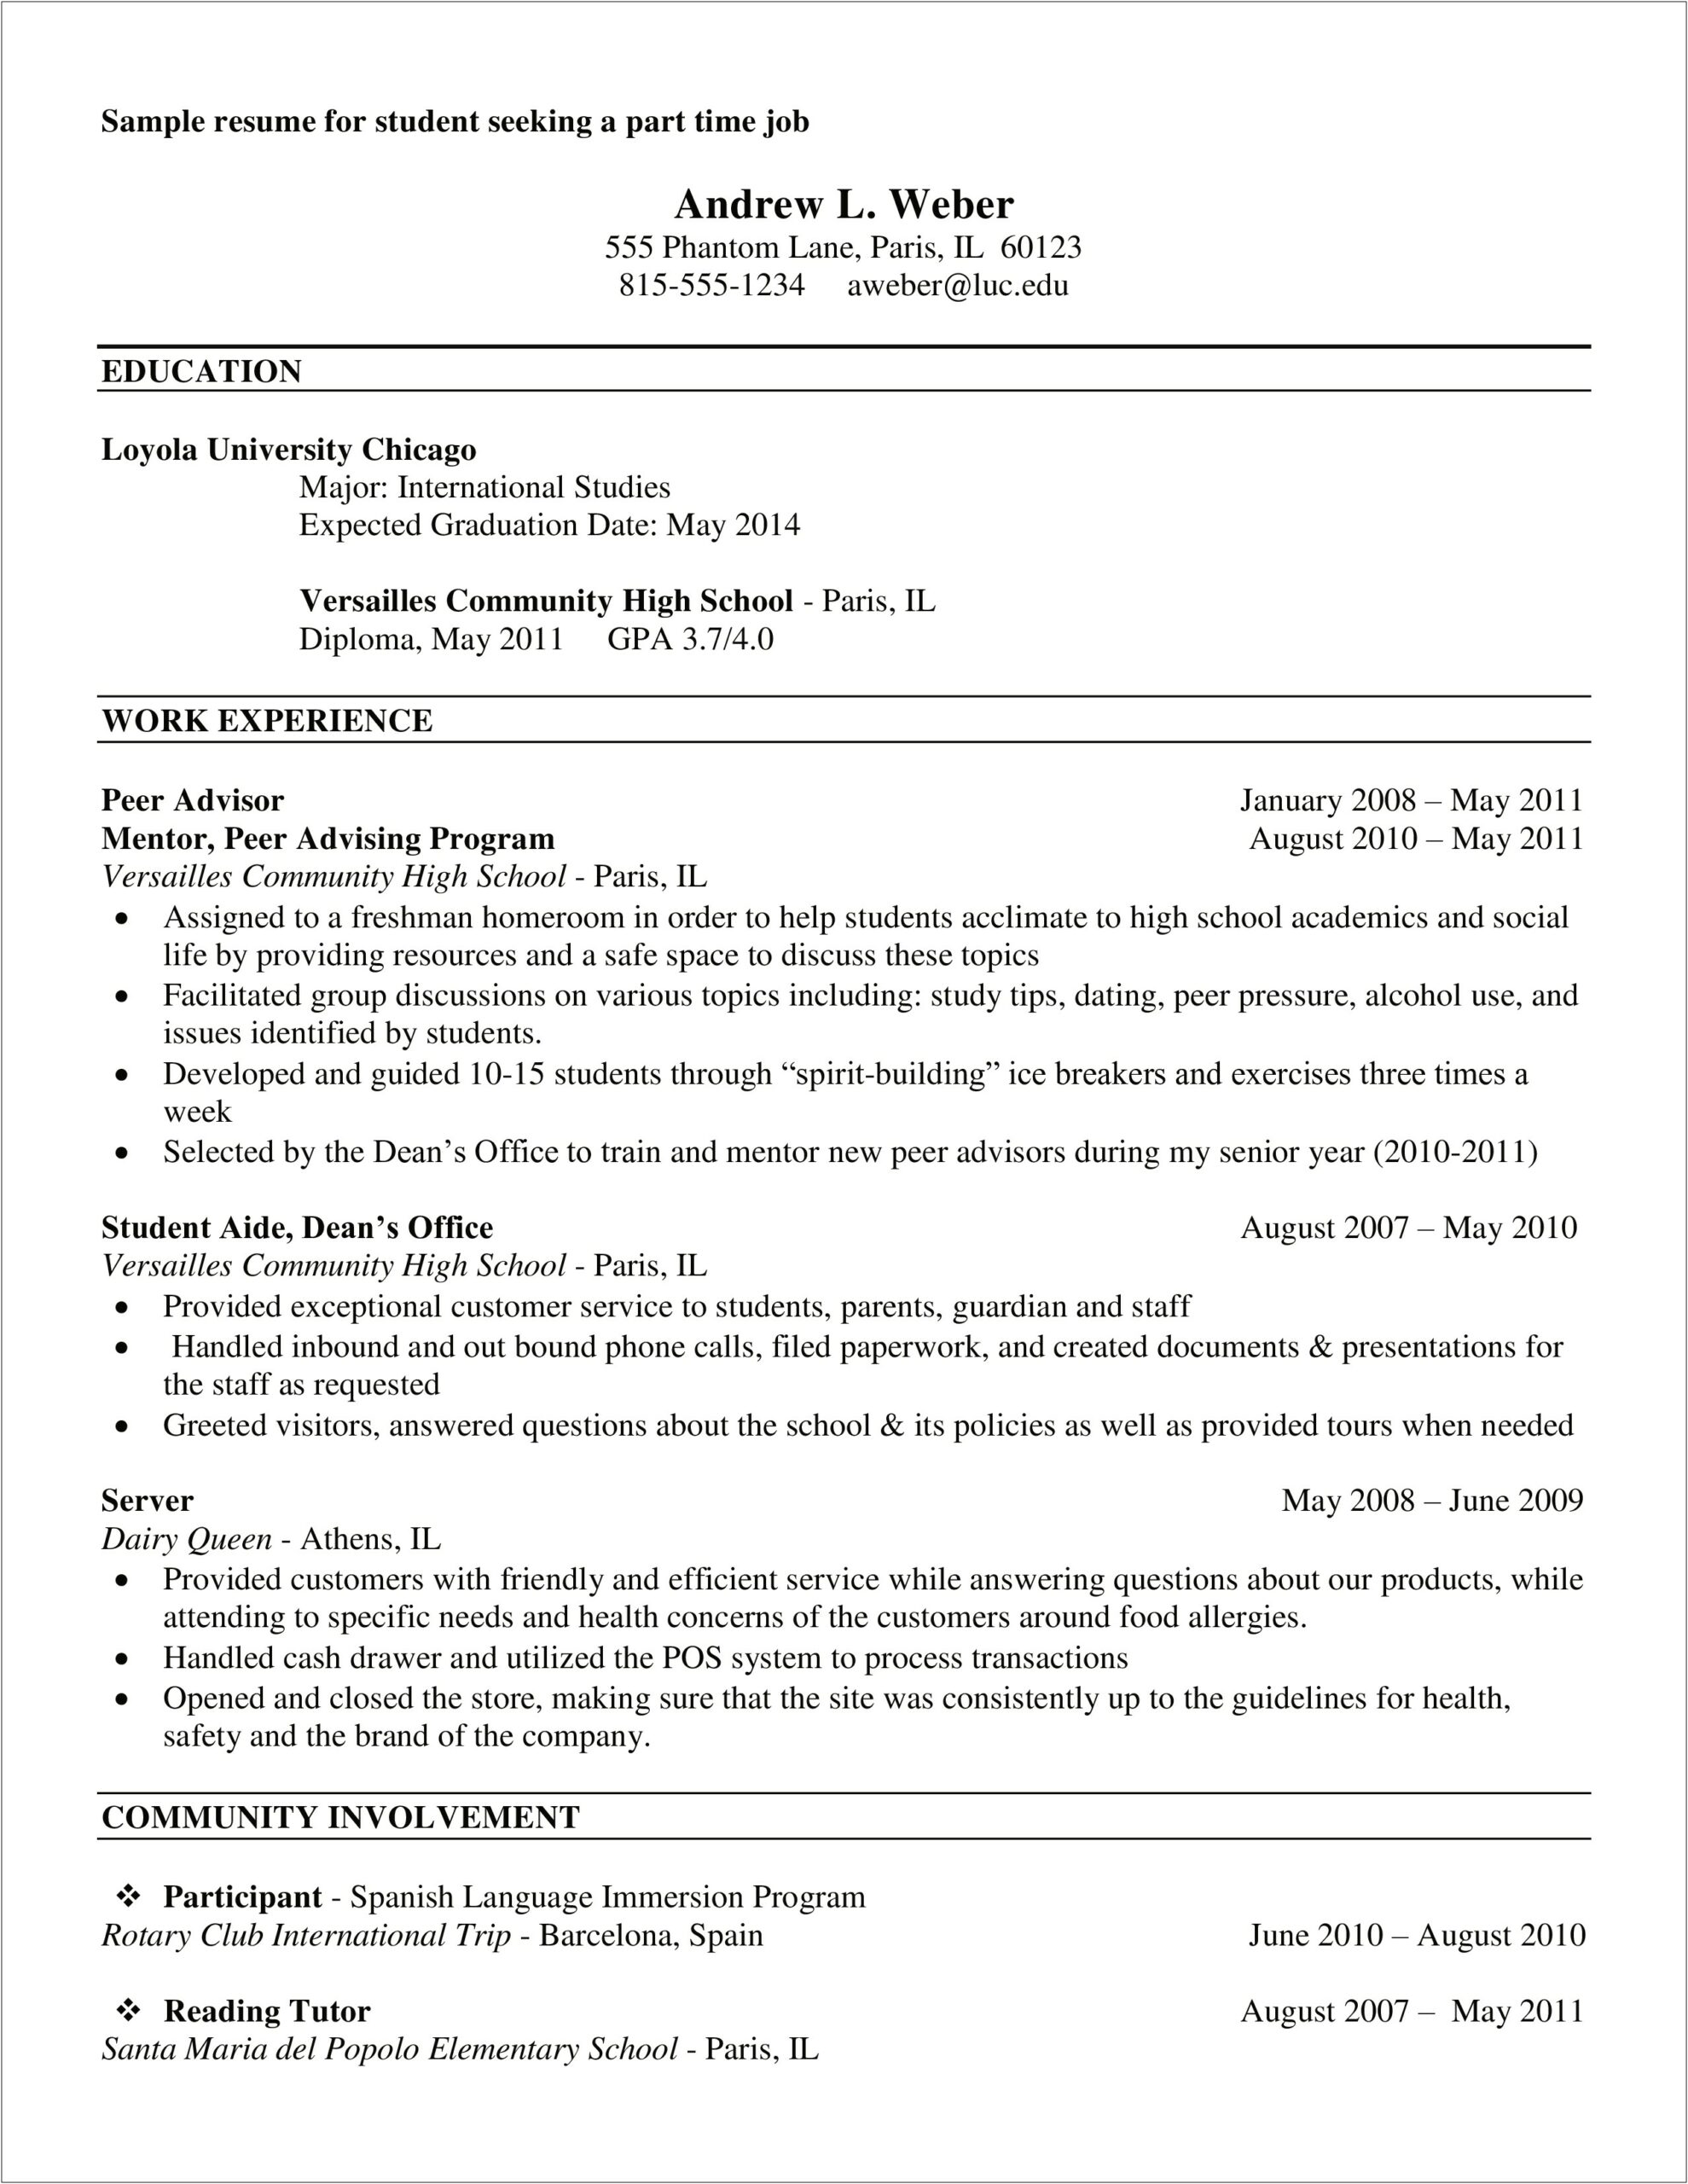 Resume College Student Part Time Job